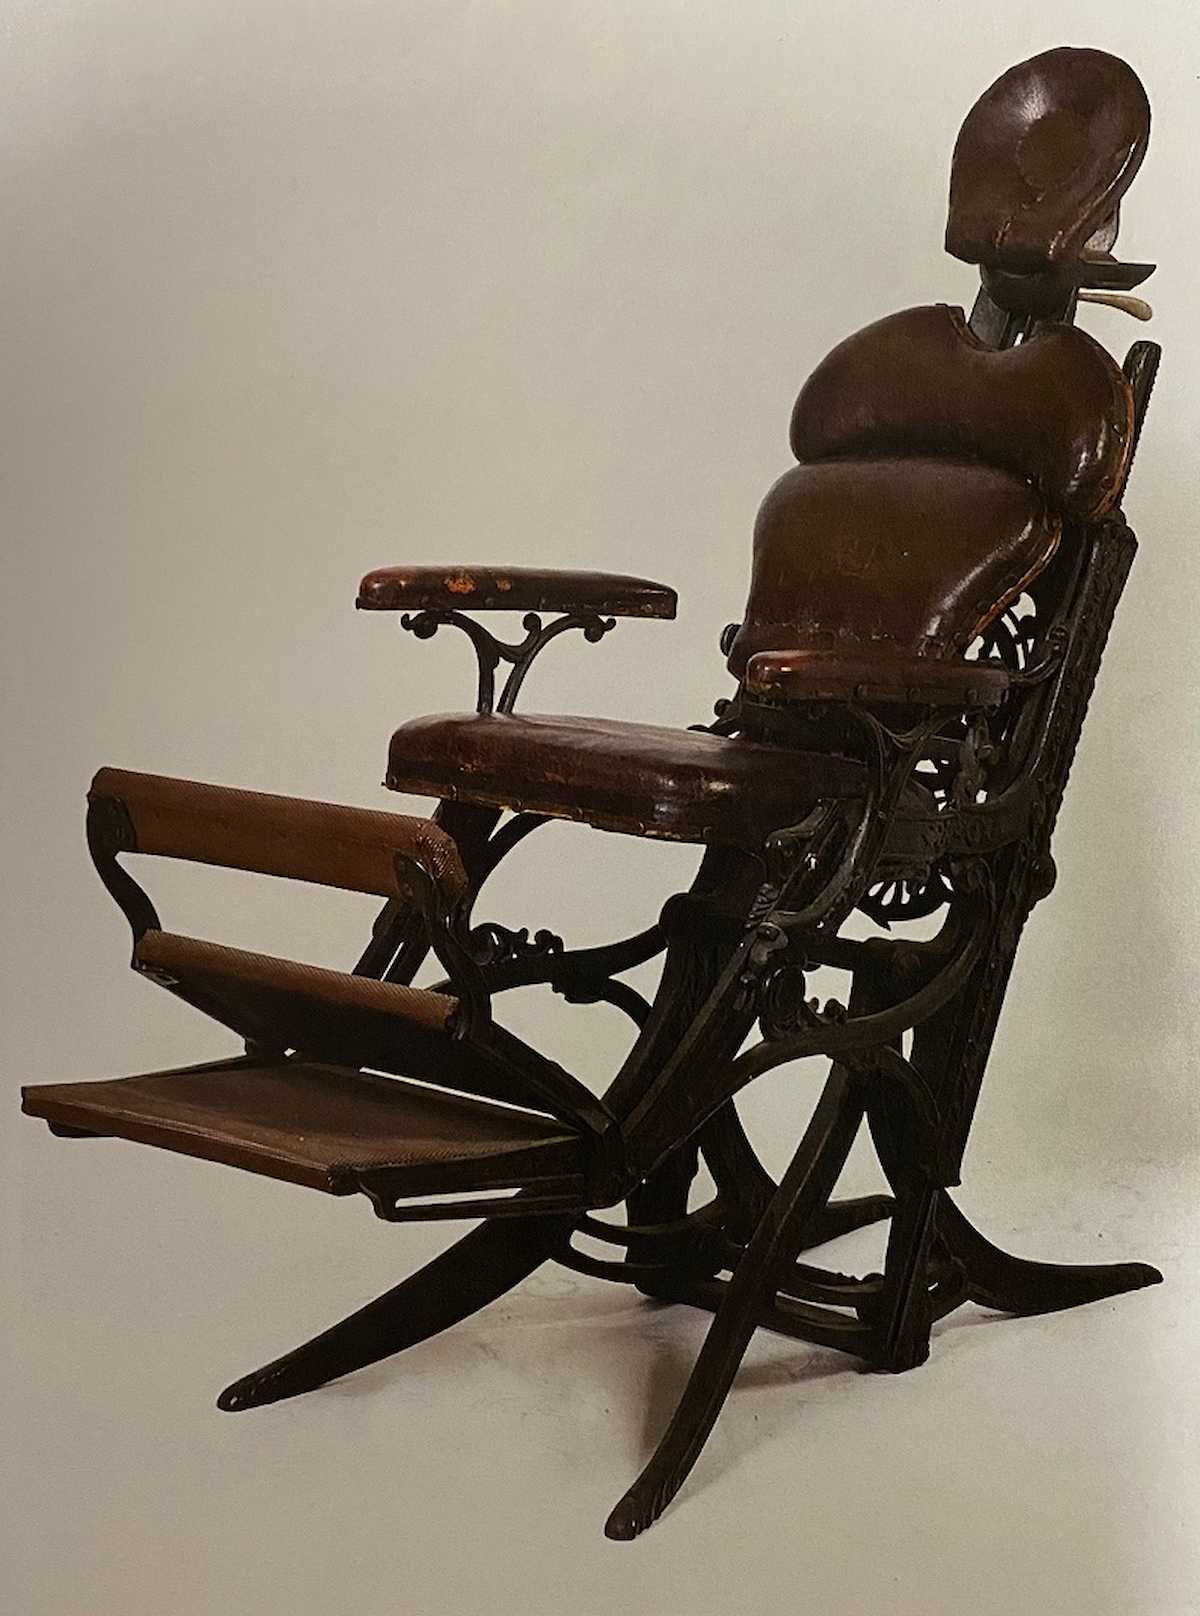 James Snell designs the reclining dental chair